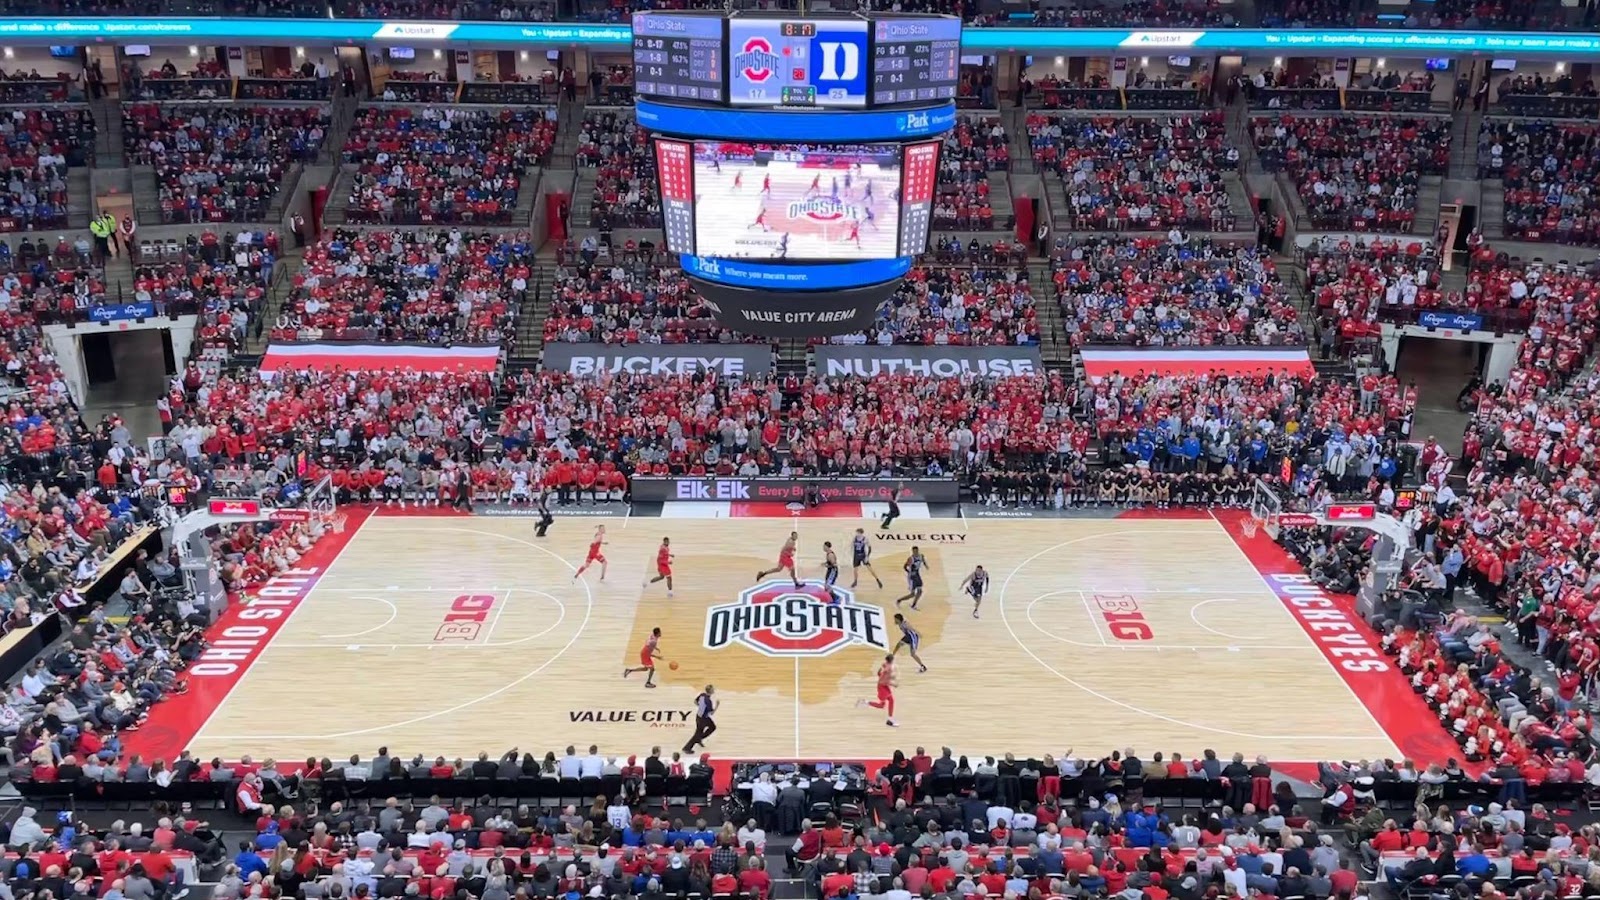 NCAAB: Ohio State expectations in Men's and Women's Tournaments